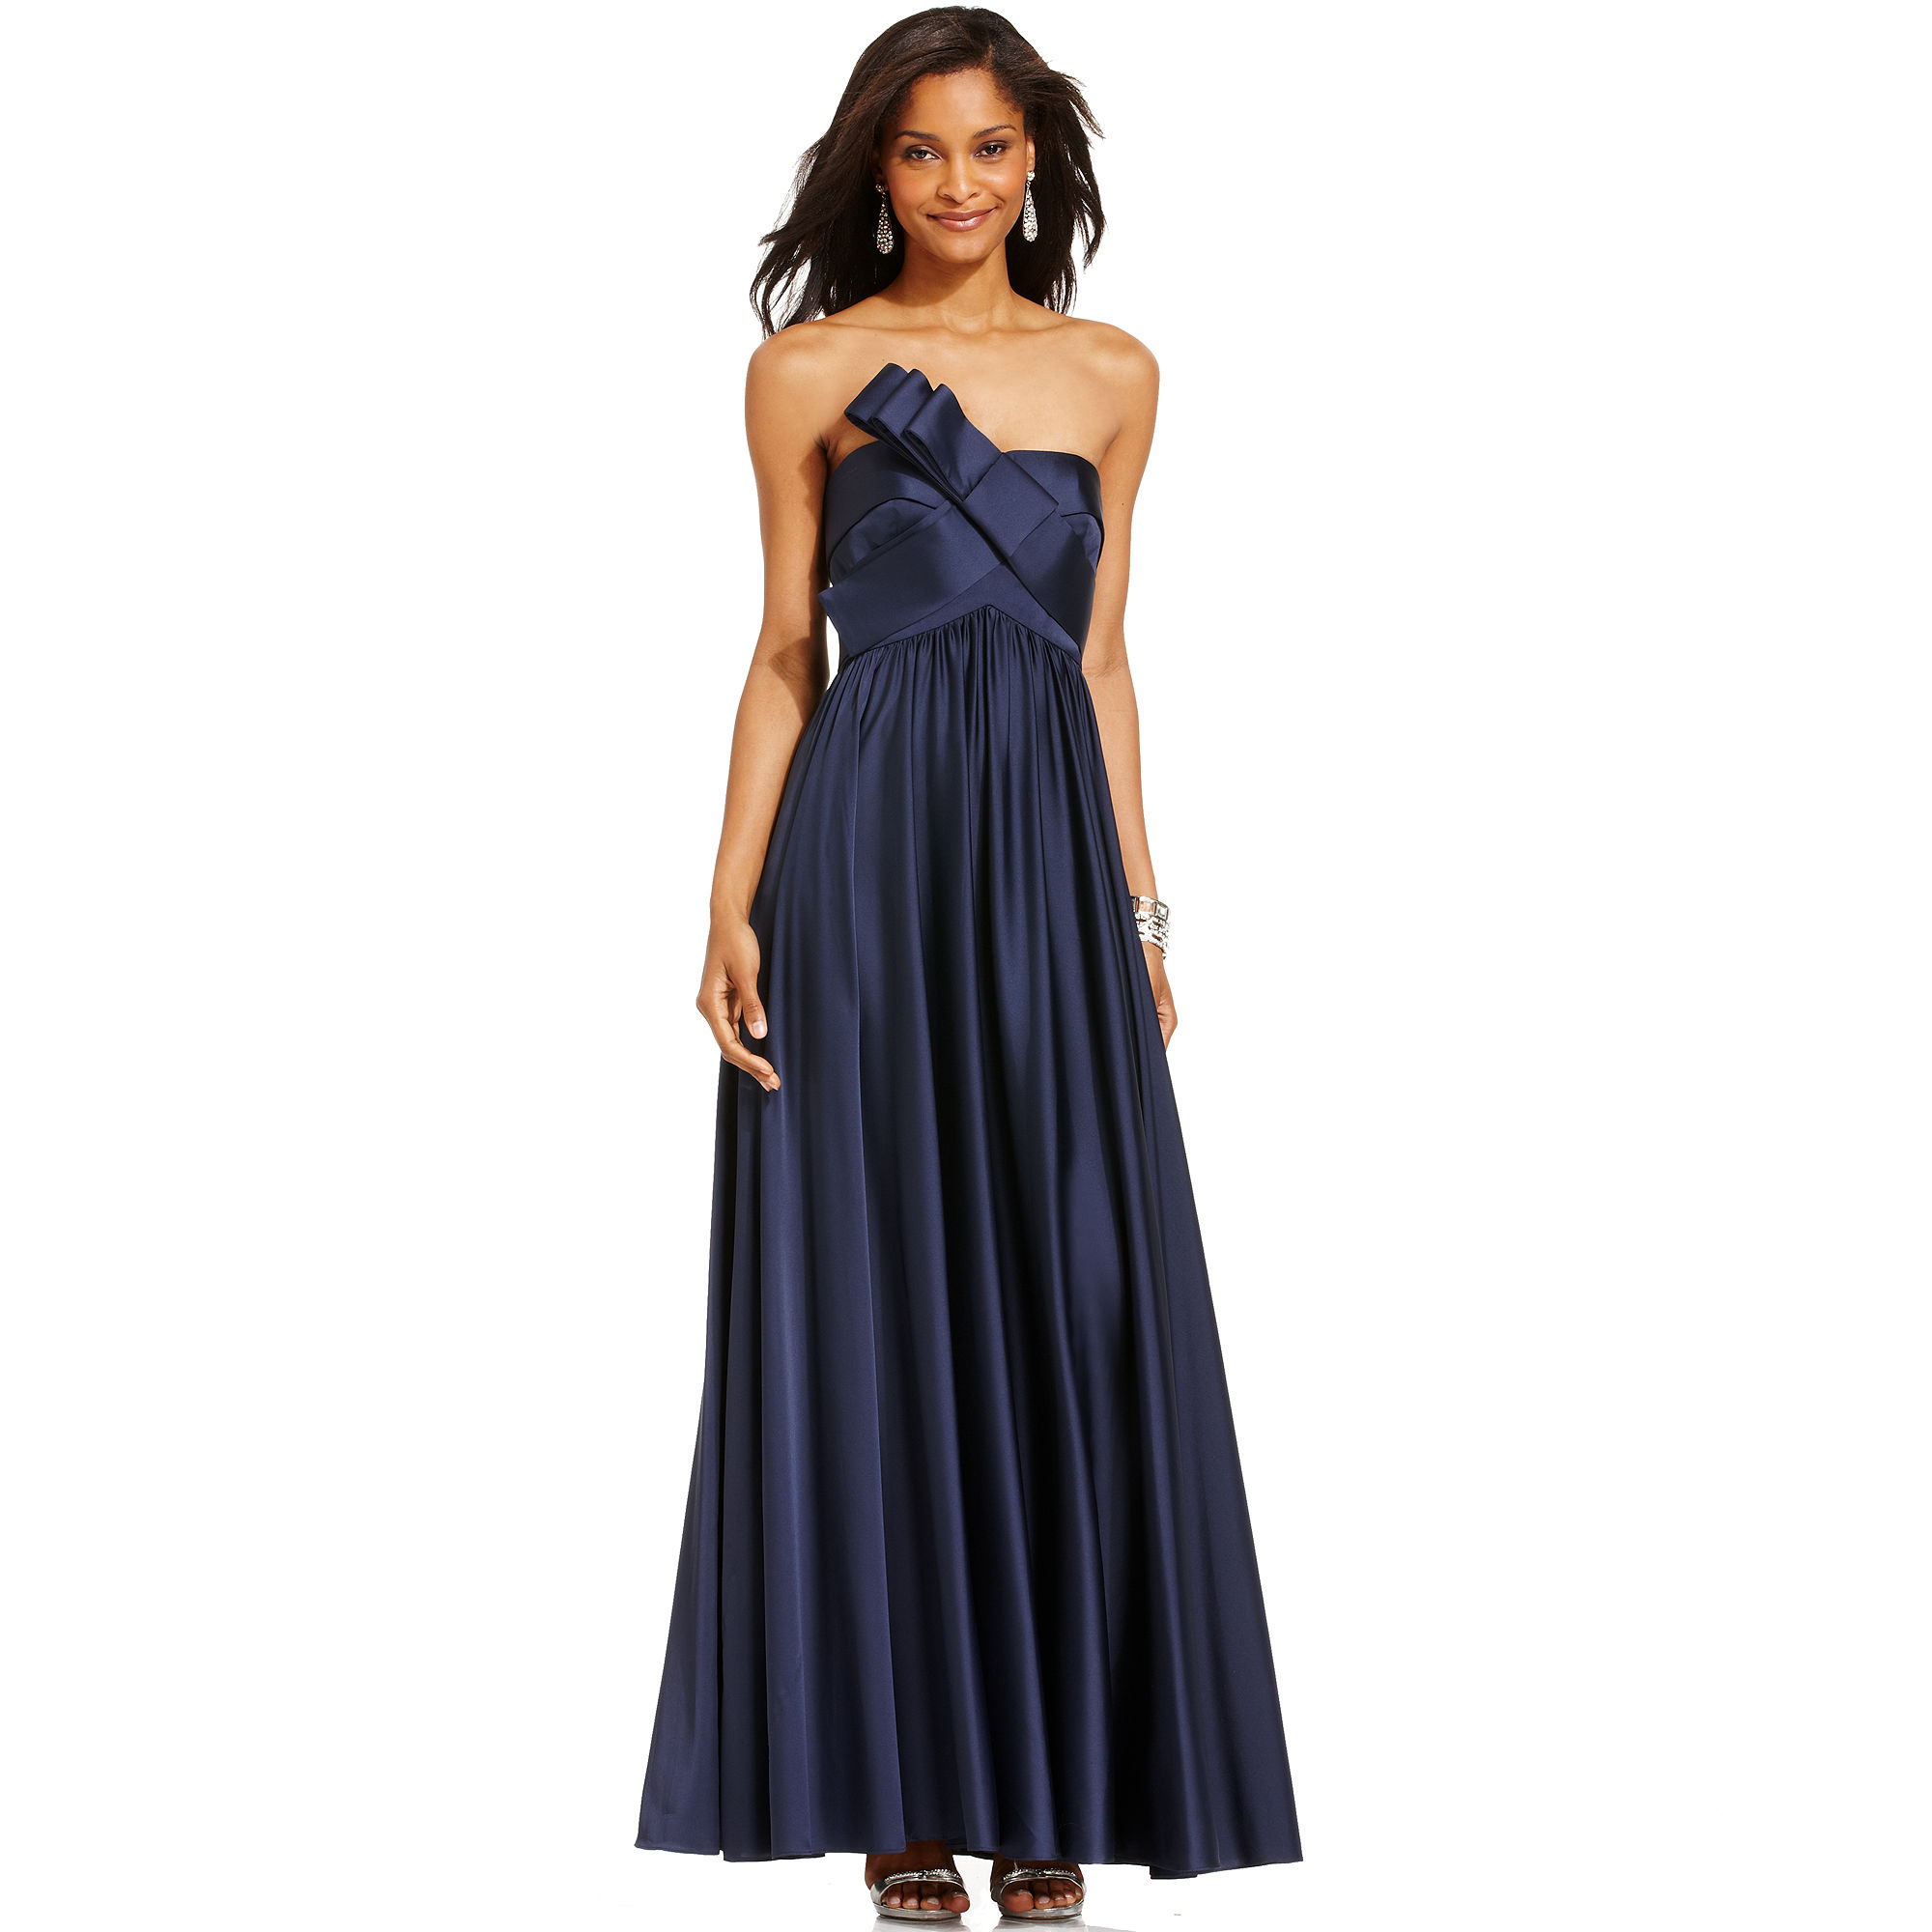 Lyst - Js collections Strapless Long Evening Dress in Blue